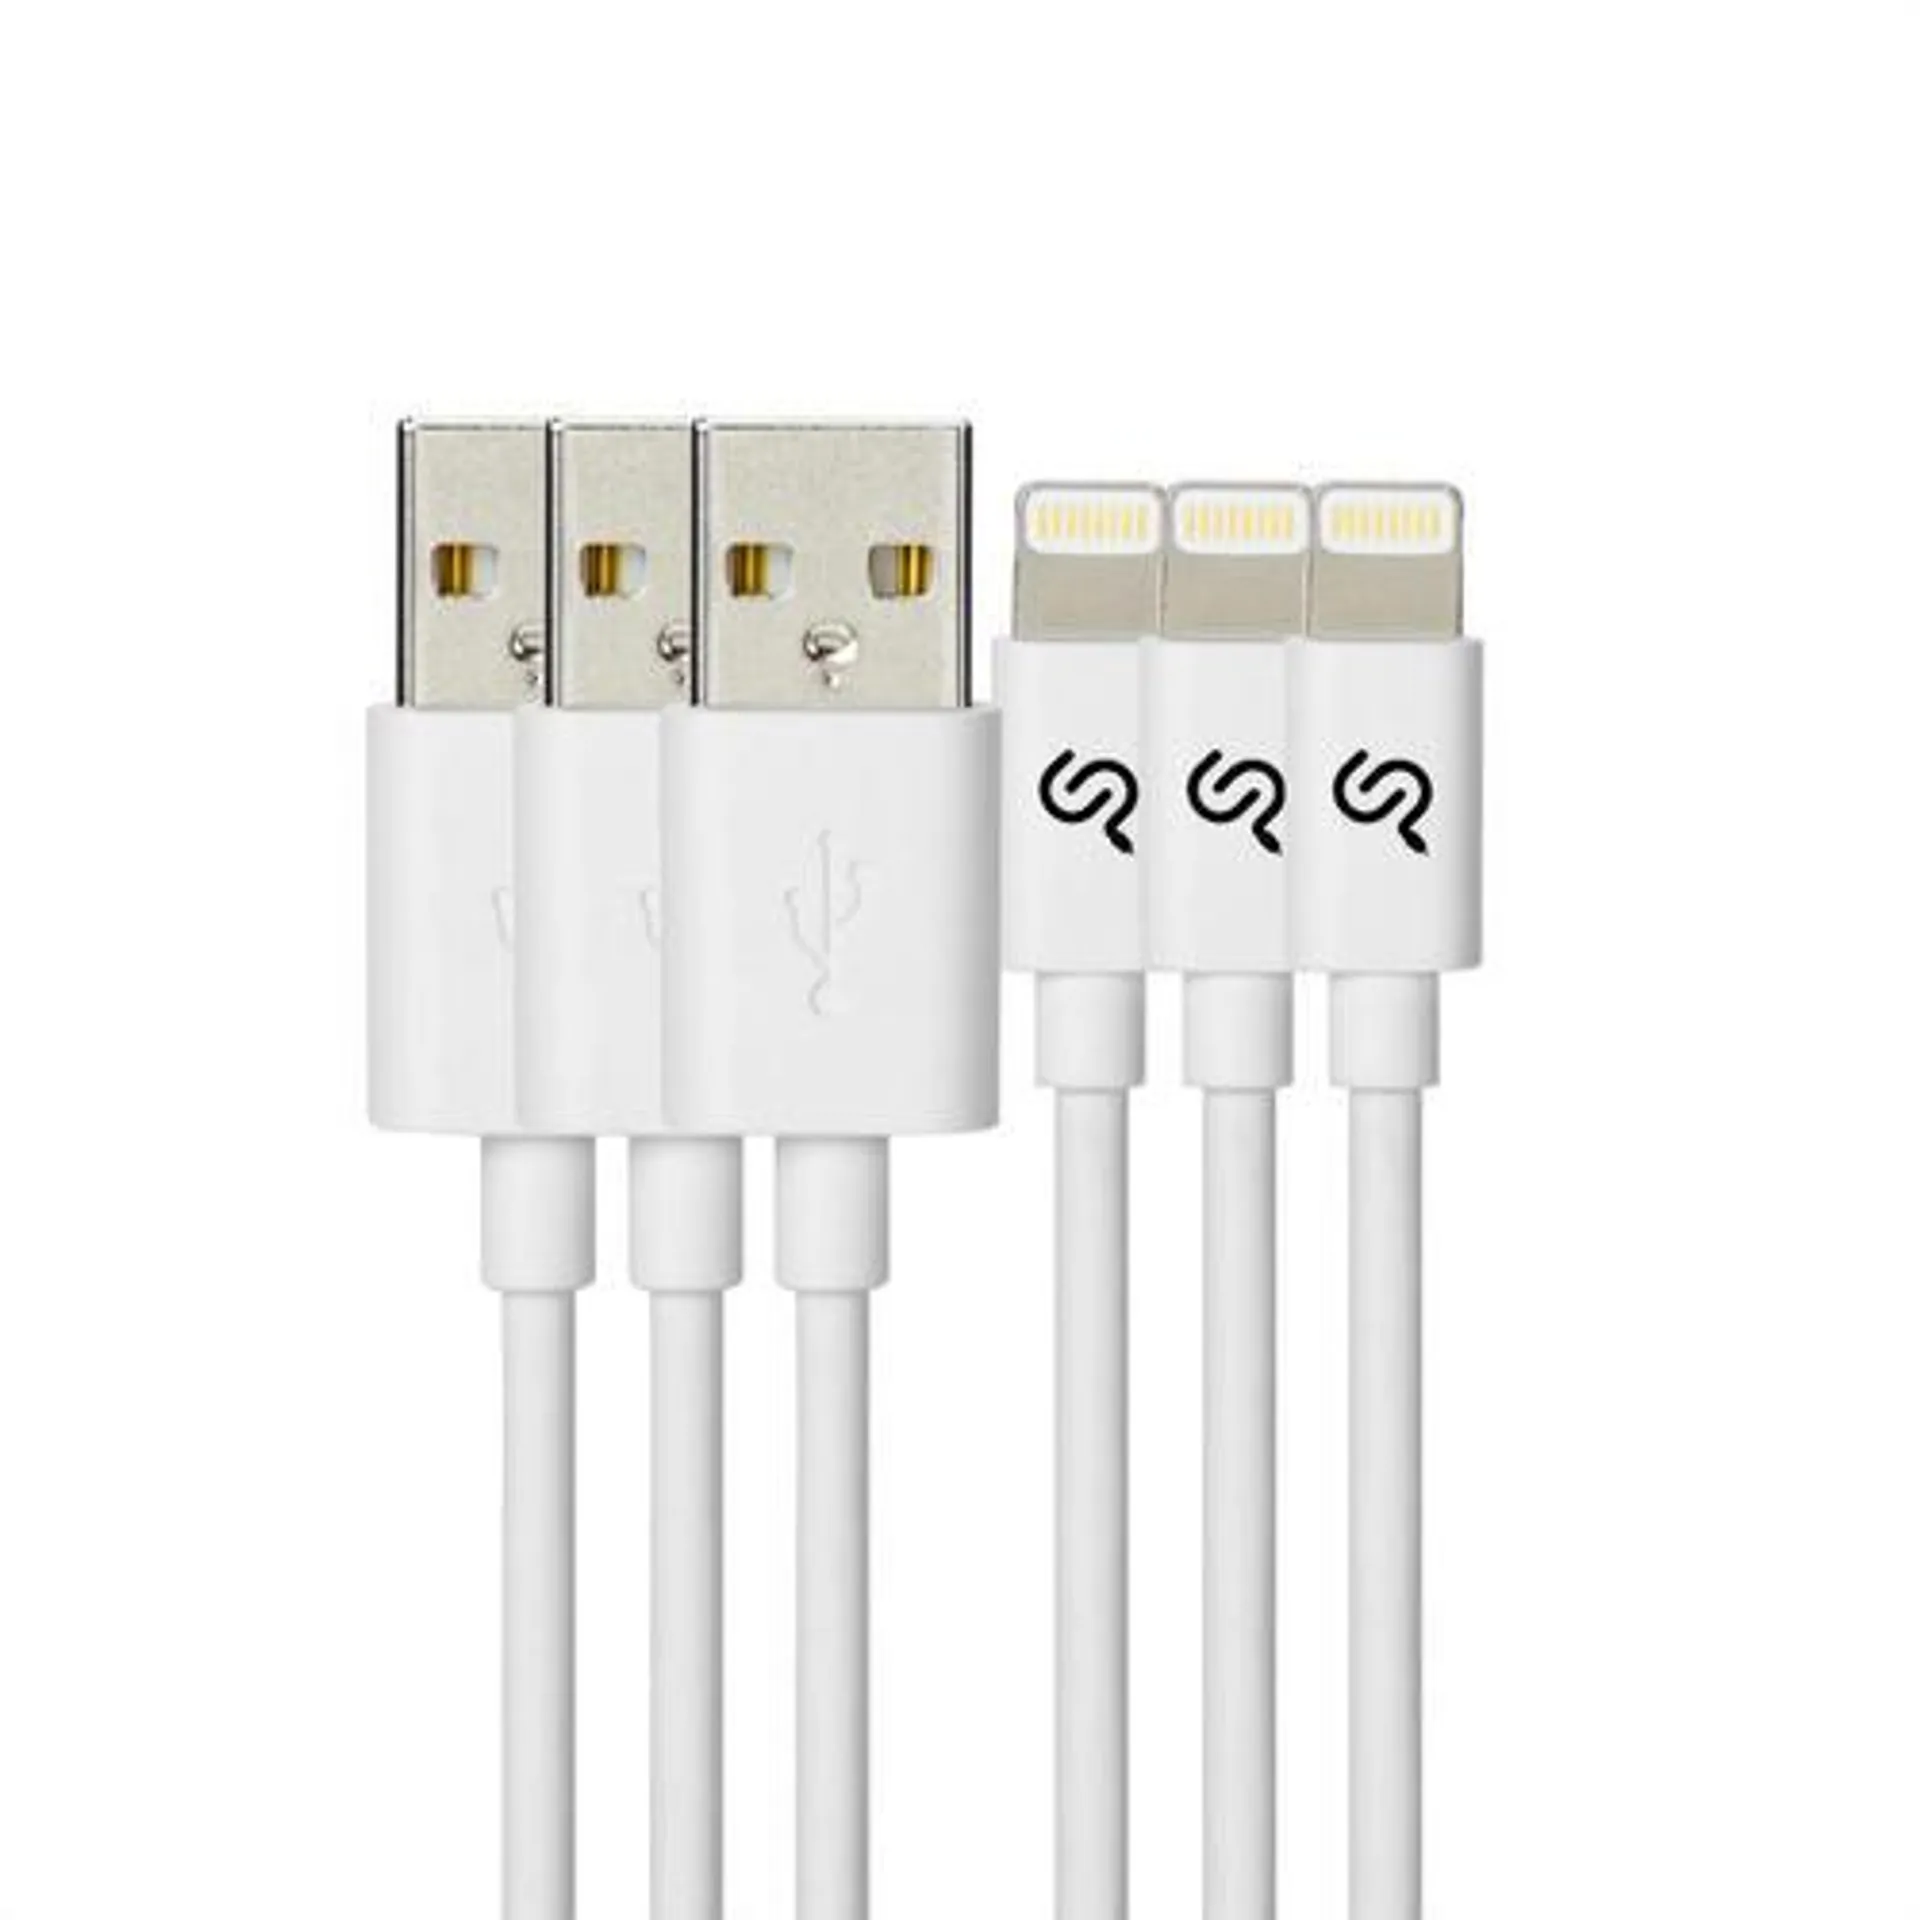 PrimeCables® Lightning Cable, Apple MFi Certified Lightning to USB 3FT (1m) Charging Sync Cable - 3/Pack, White